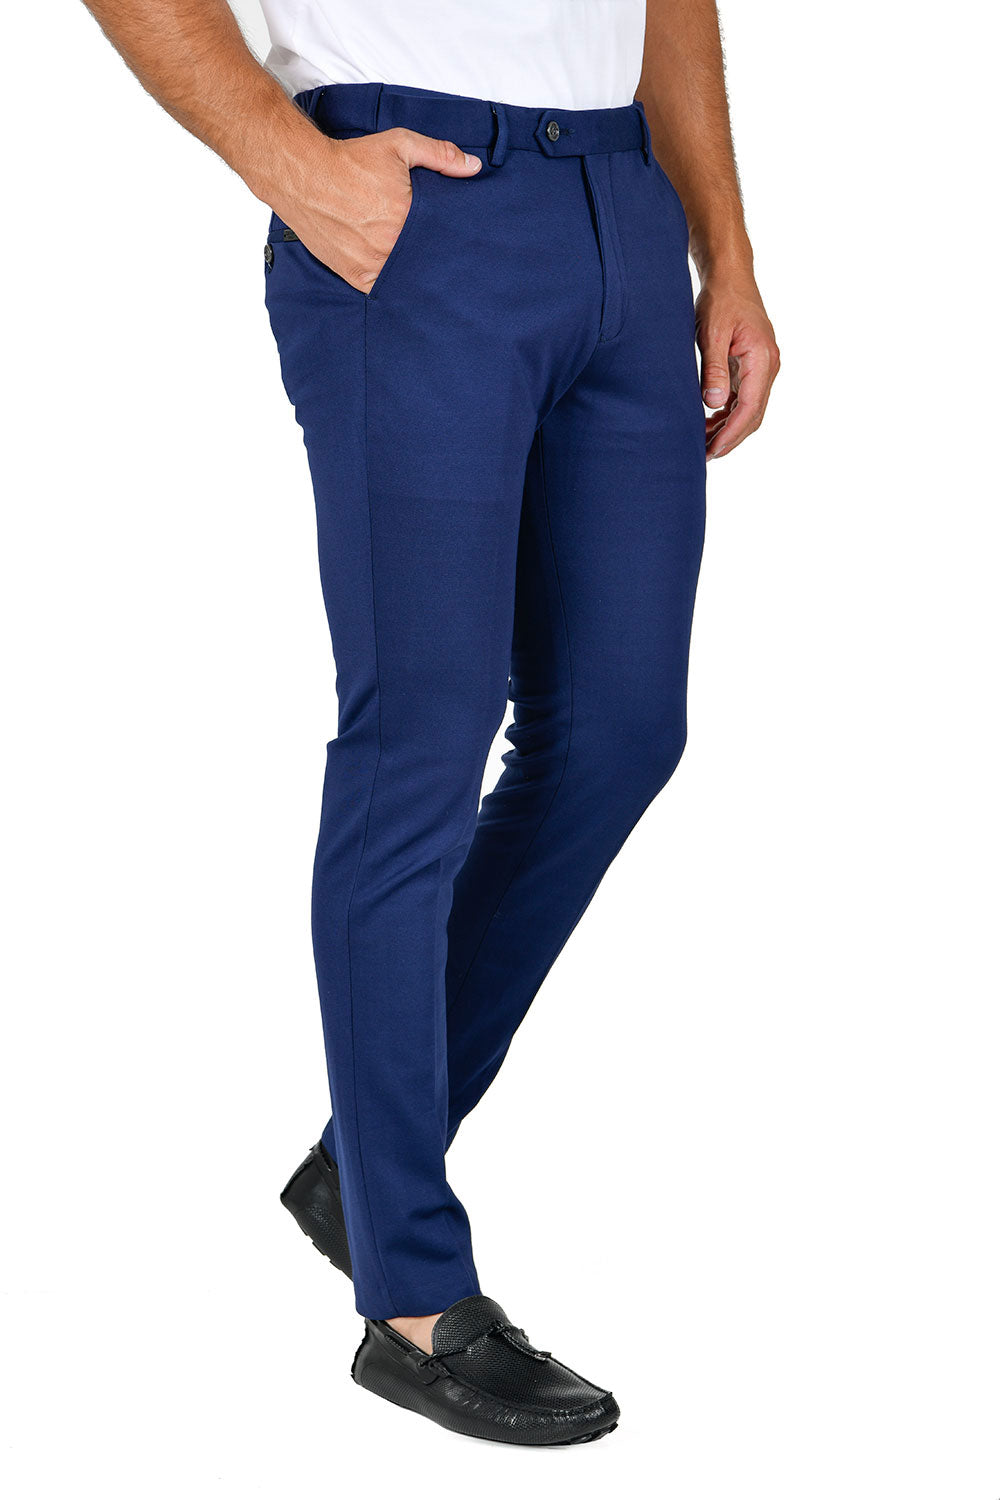 Barabas Men's Solid Color Basic Essential Chino Dress Pants CP4007 Navy